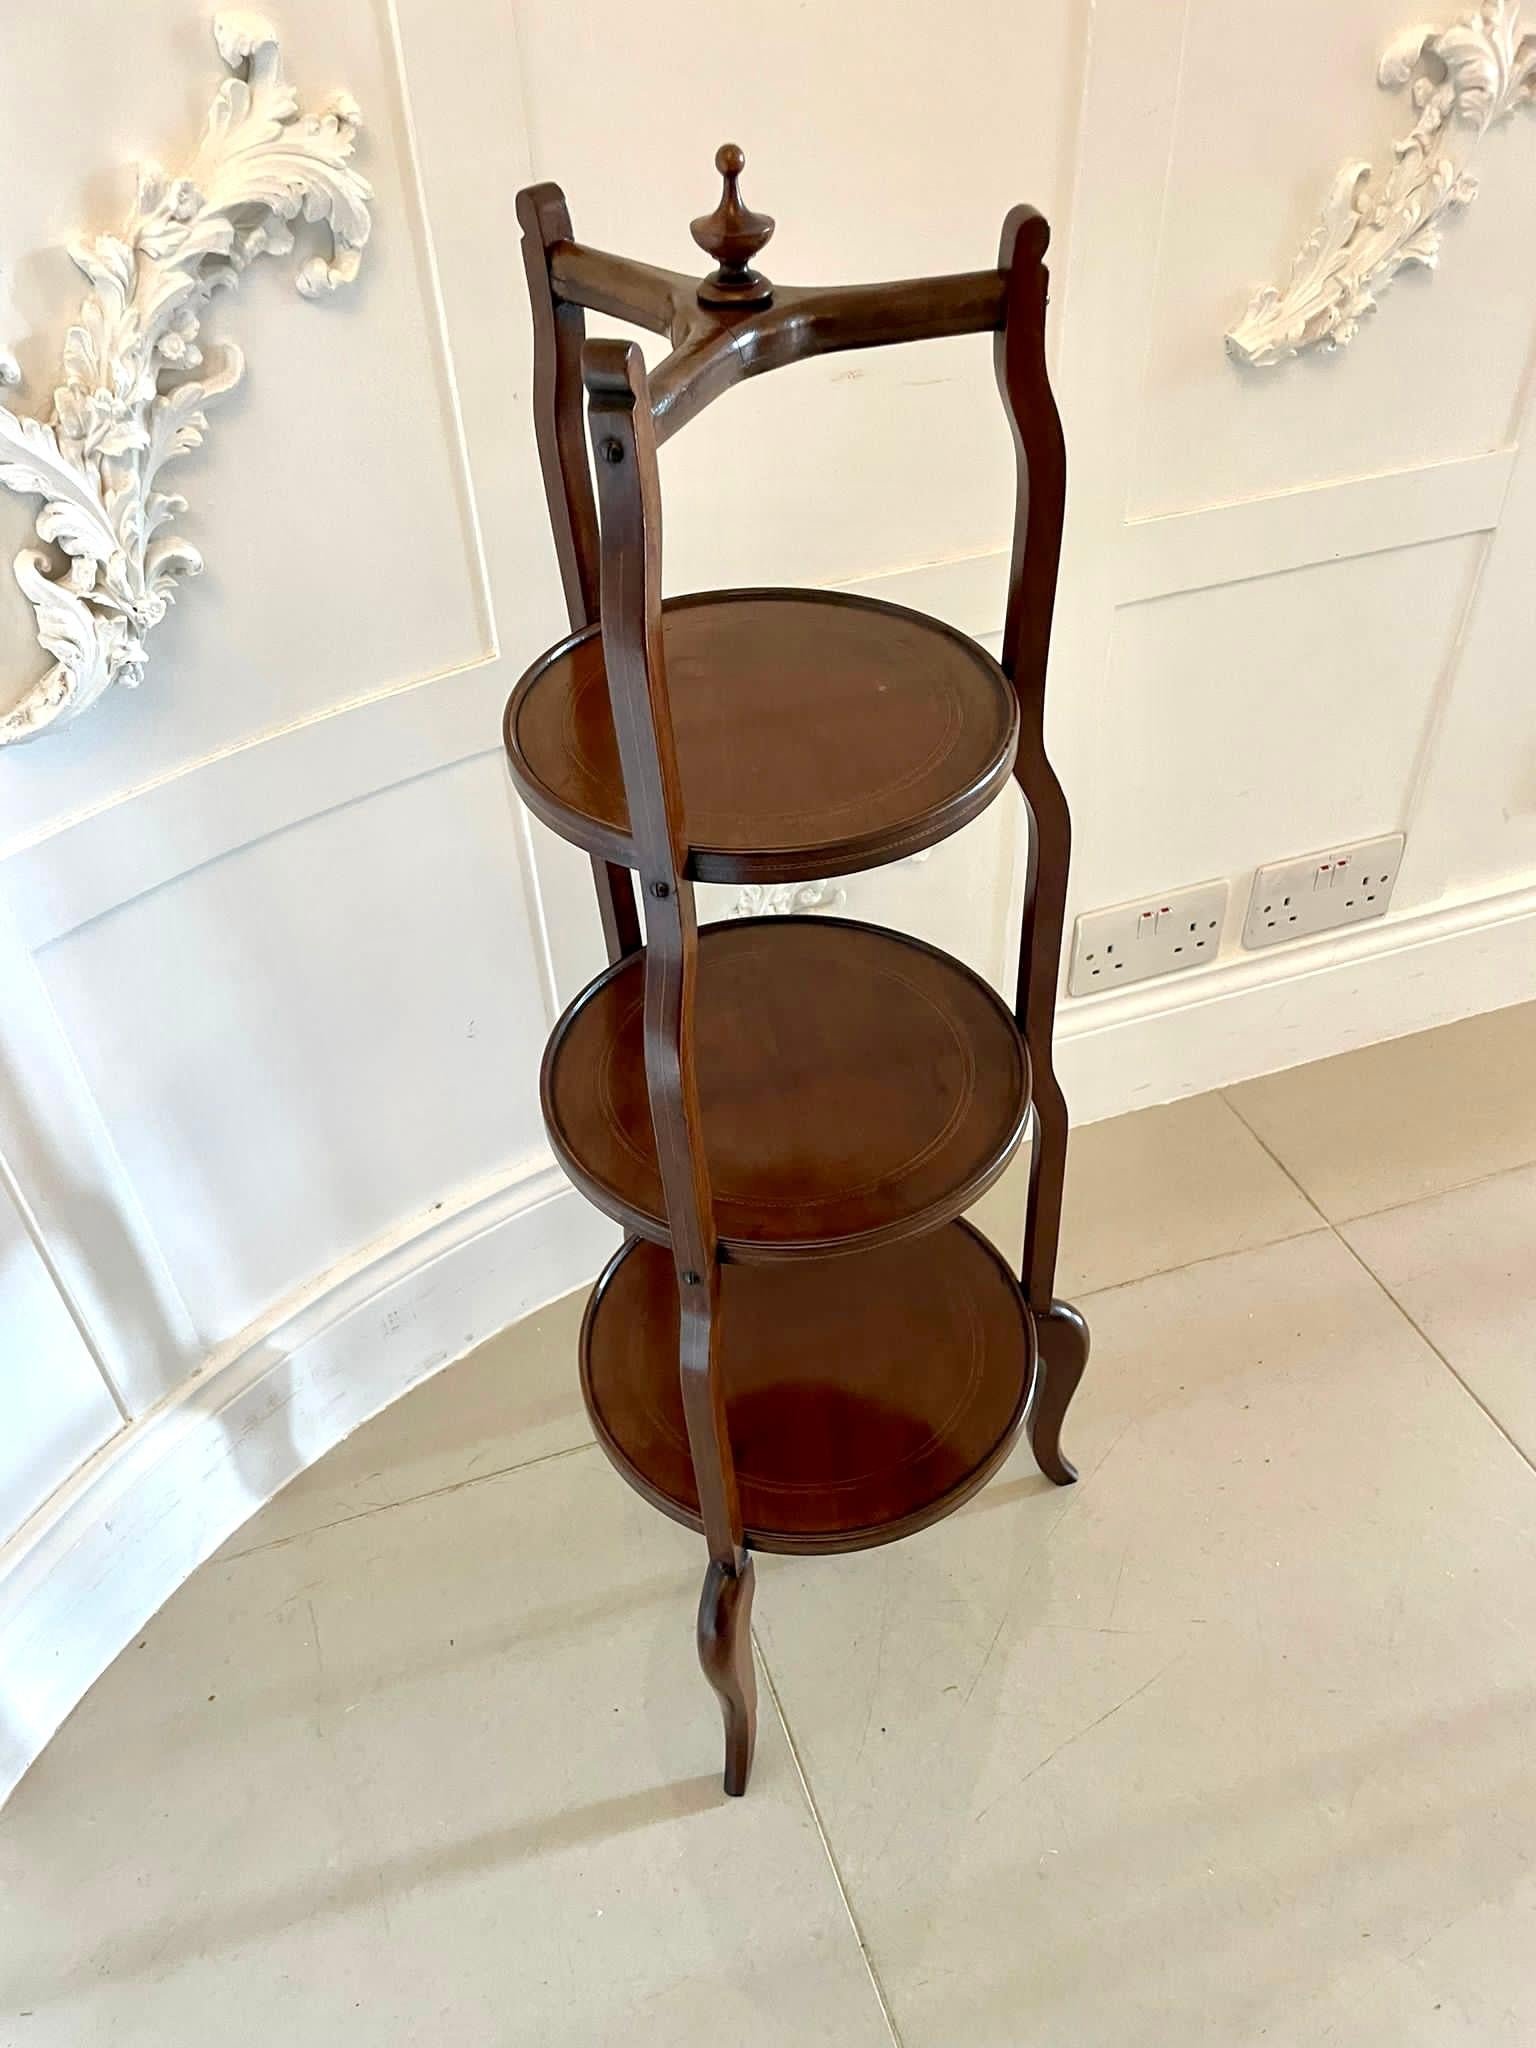 Antique Edwardian three tier cake stand with a turned finial to the top above a cross stretcher, three shaped mahogany inlaid supports united by three mahogany circular shelves with a moulded edge and raised on shaped cabriole legs.

A charming